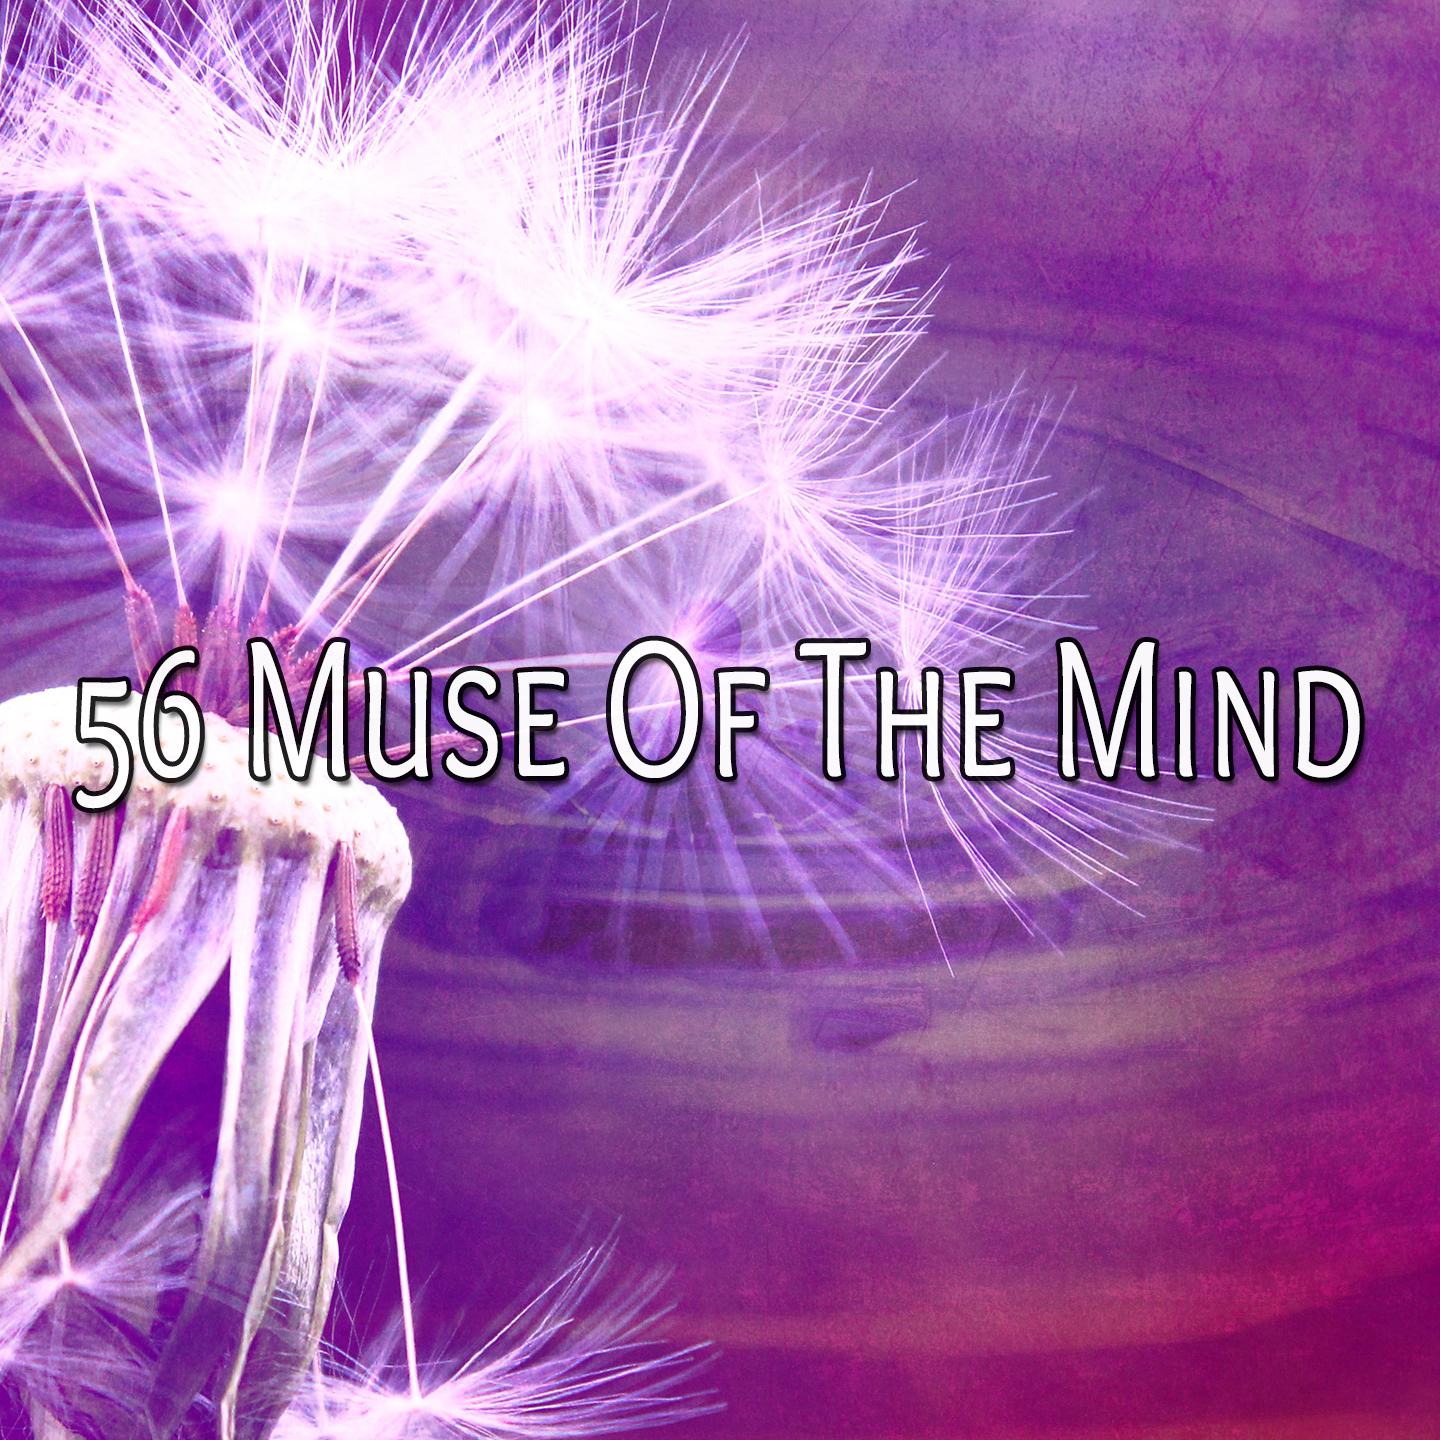 56 Muse of the Mind